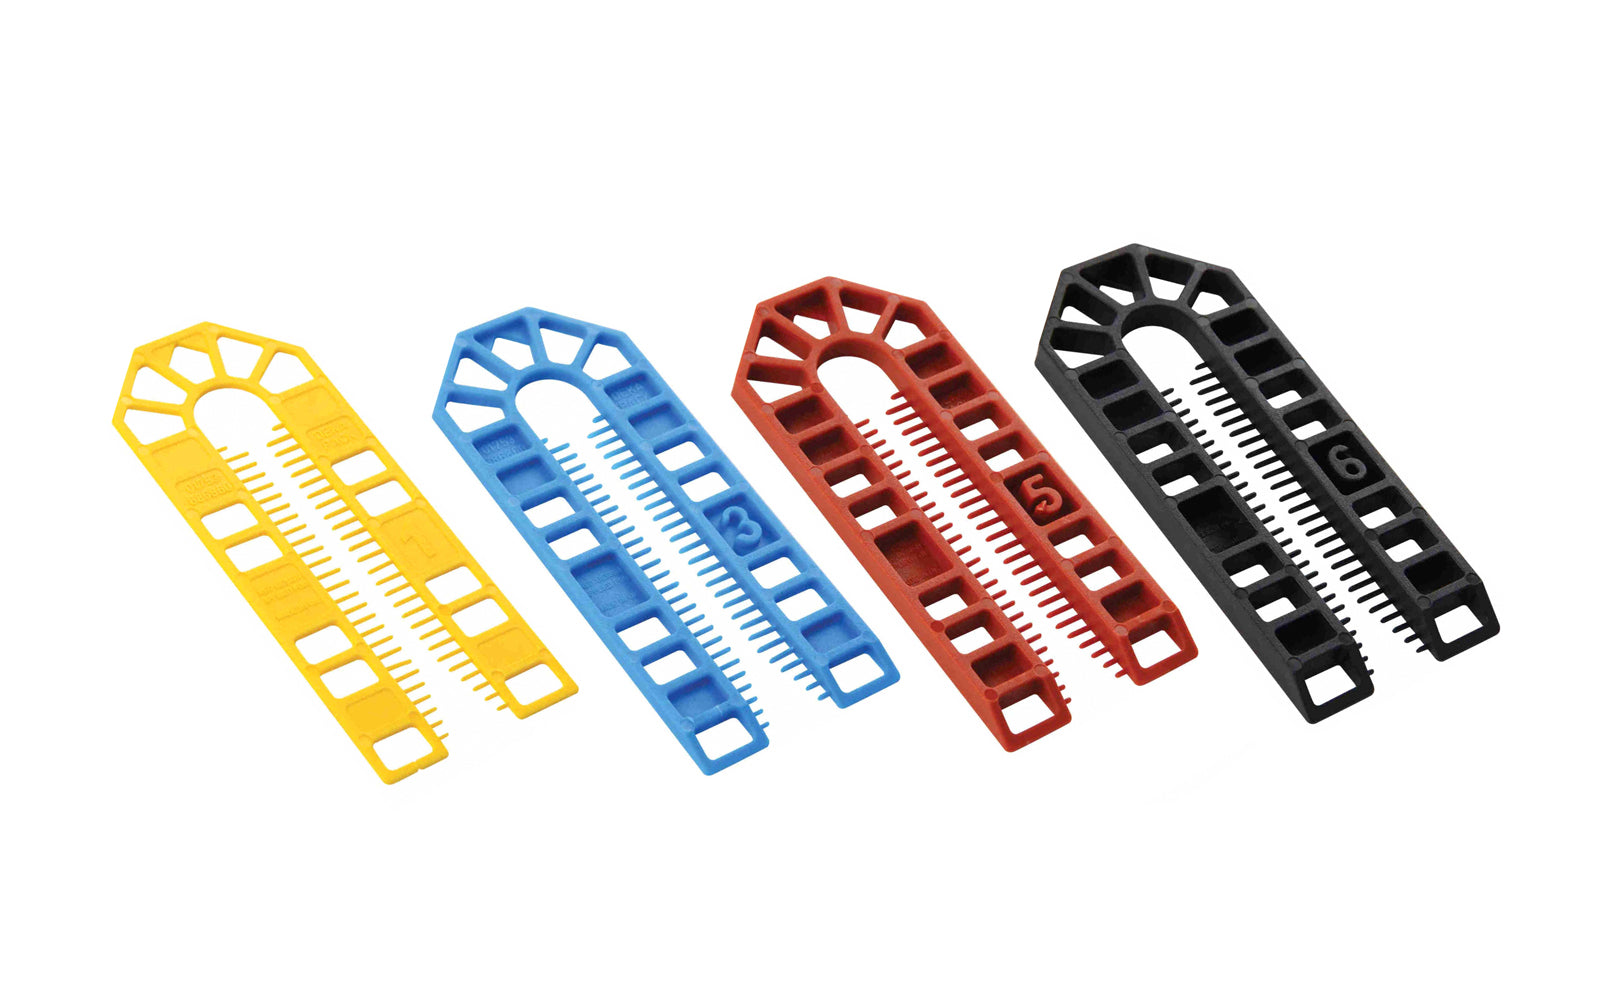 These 4" x 1-3/4" plastic standard U shims by Broadfix are great for a variety of applications. Use for doors, windows, cabinets, countertops, leveling appliances, floors, craft projects etc. 60 pack bundle. Includes 10 each of the following sizes: 1/32" (1 mm), 1/8" (3 mm), 3/16" (5 mm), 1/4" (6 mm). 5060172010981